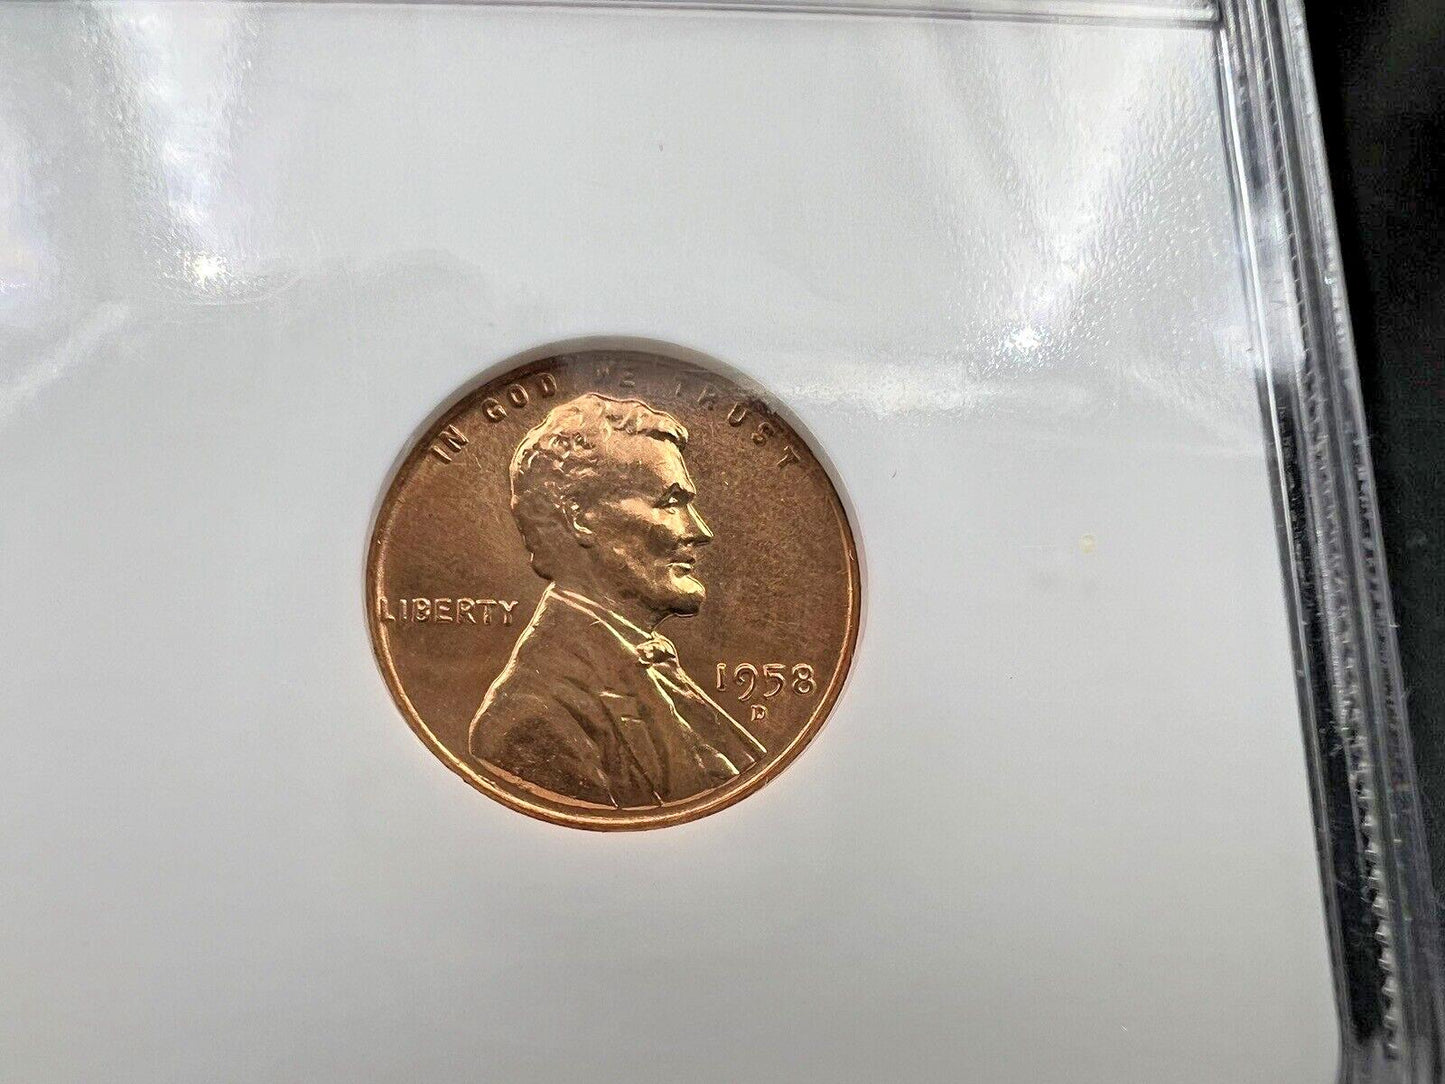 1958 D 1c Lincoln Wheat Cent Penny Coin NGC MS67 RD Gem BU Certified #007